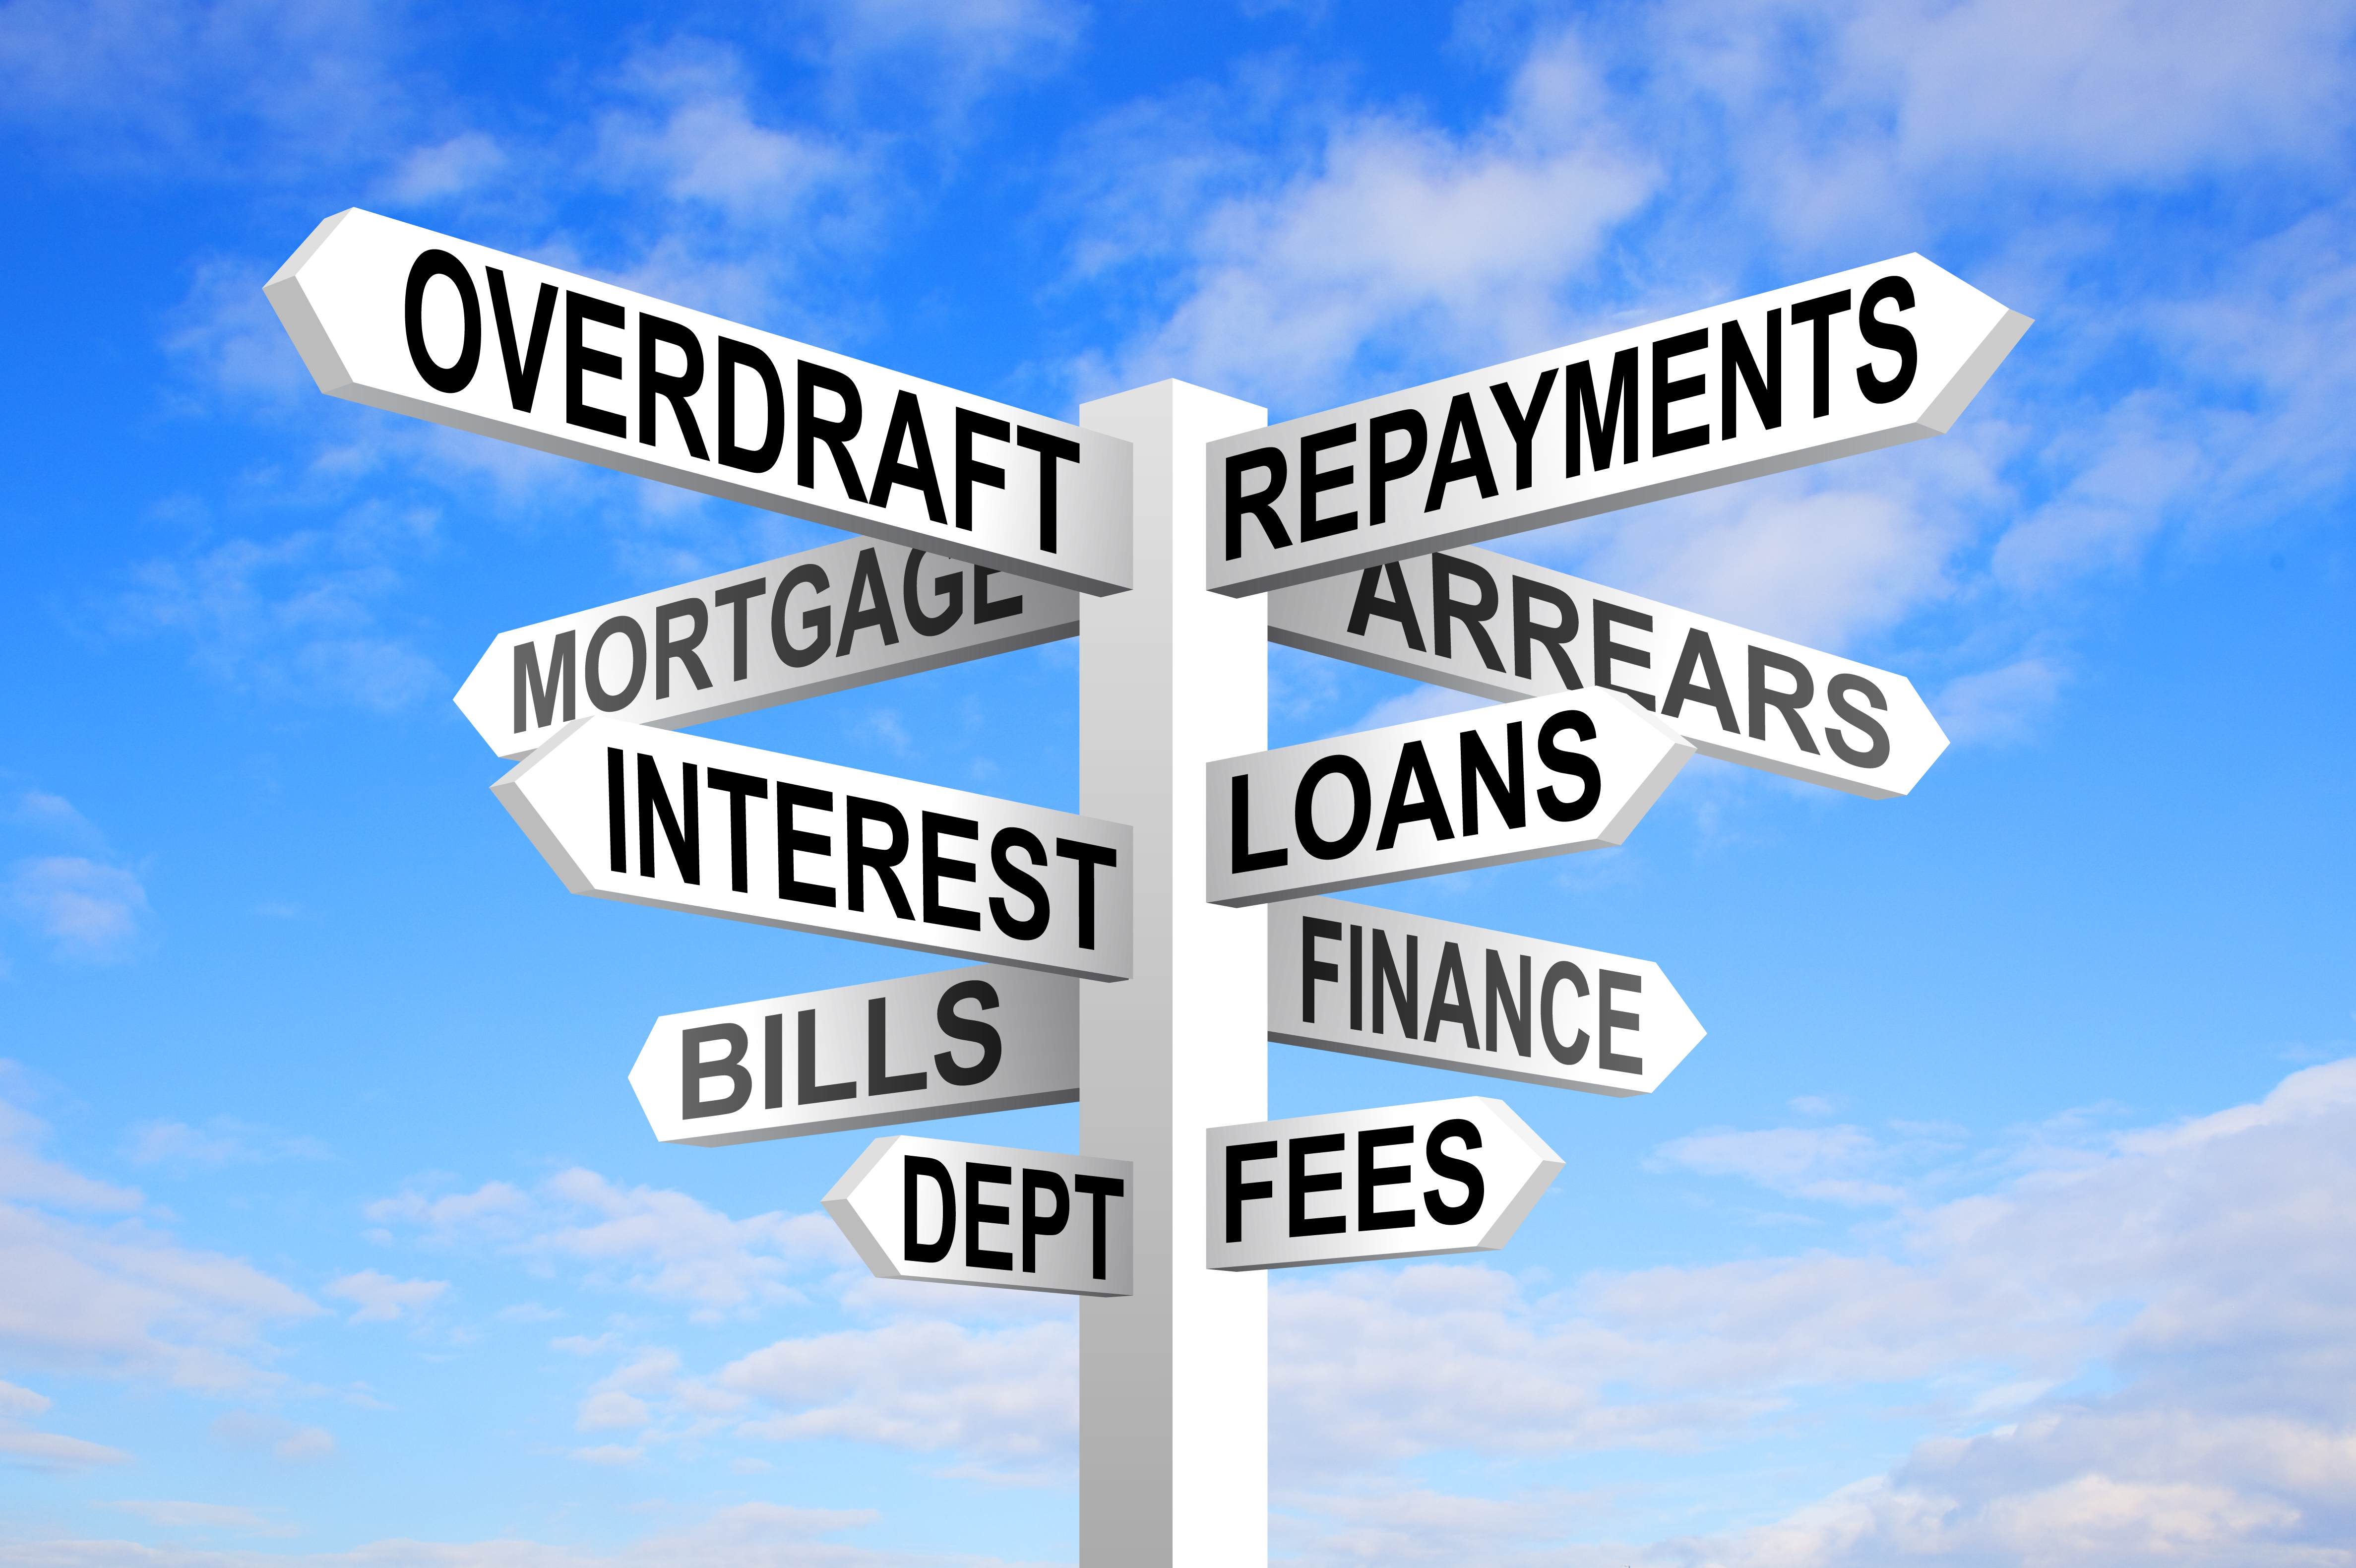 Issues that may result in filing bankruptcy